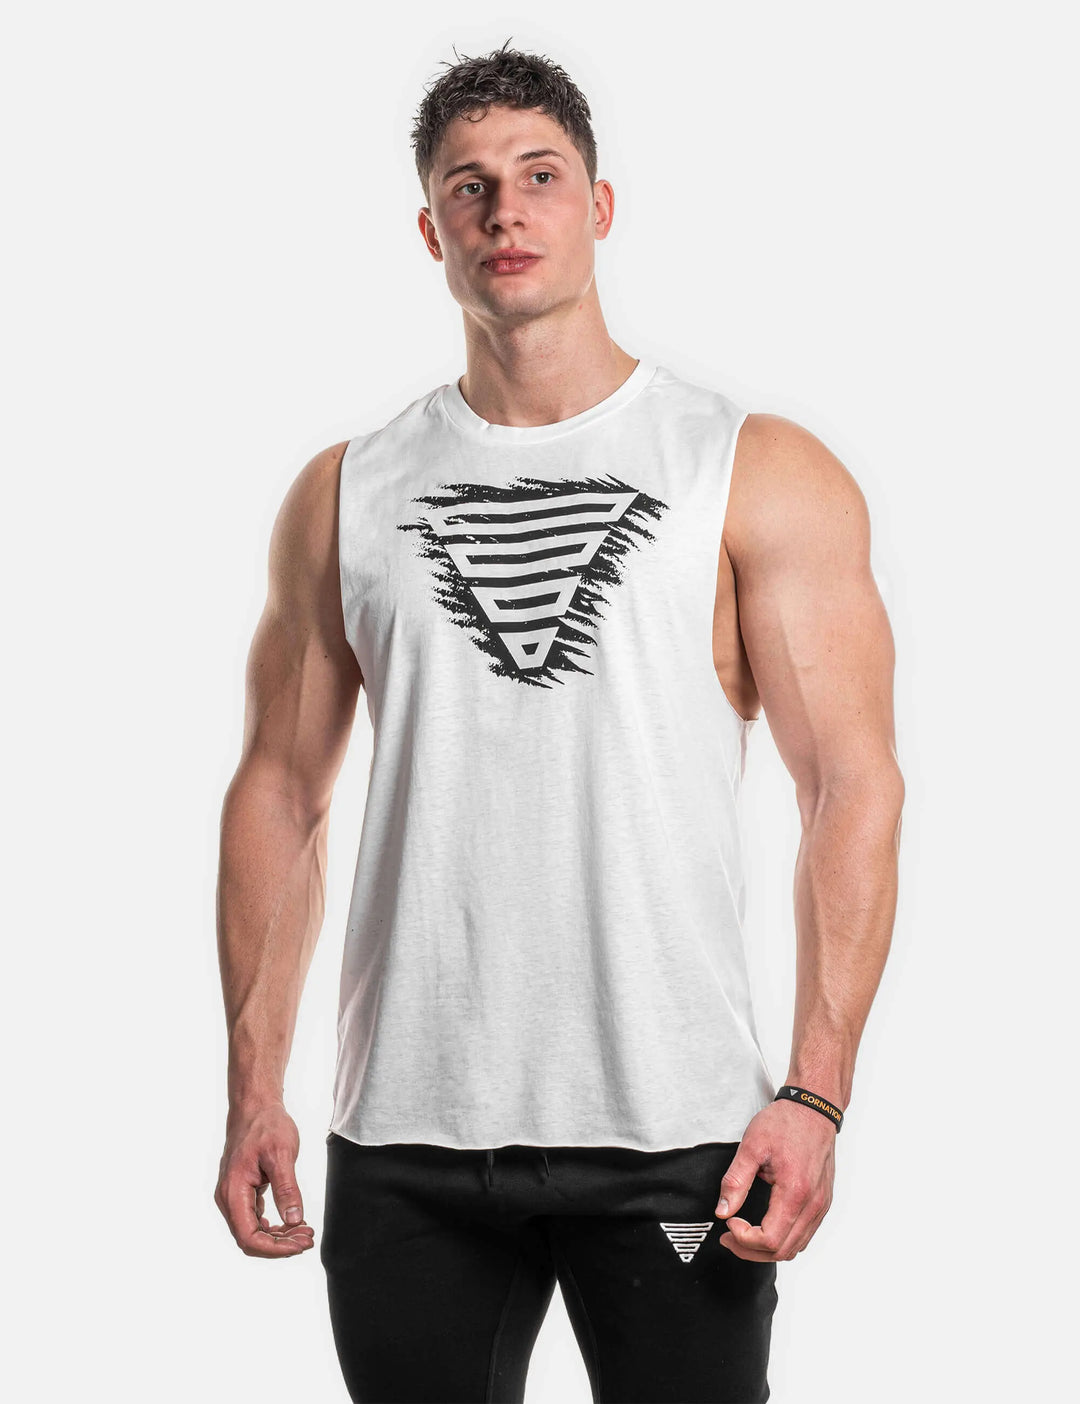 TANKTOP ideas for men🔥💯 VISIT MY PROFILE MARKETPLACE TO FIND